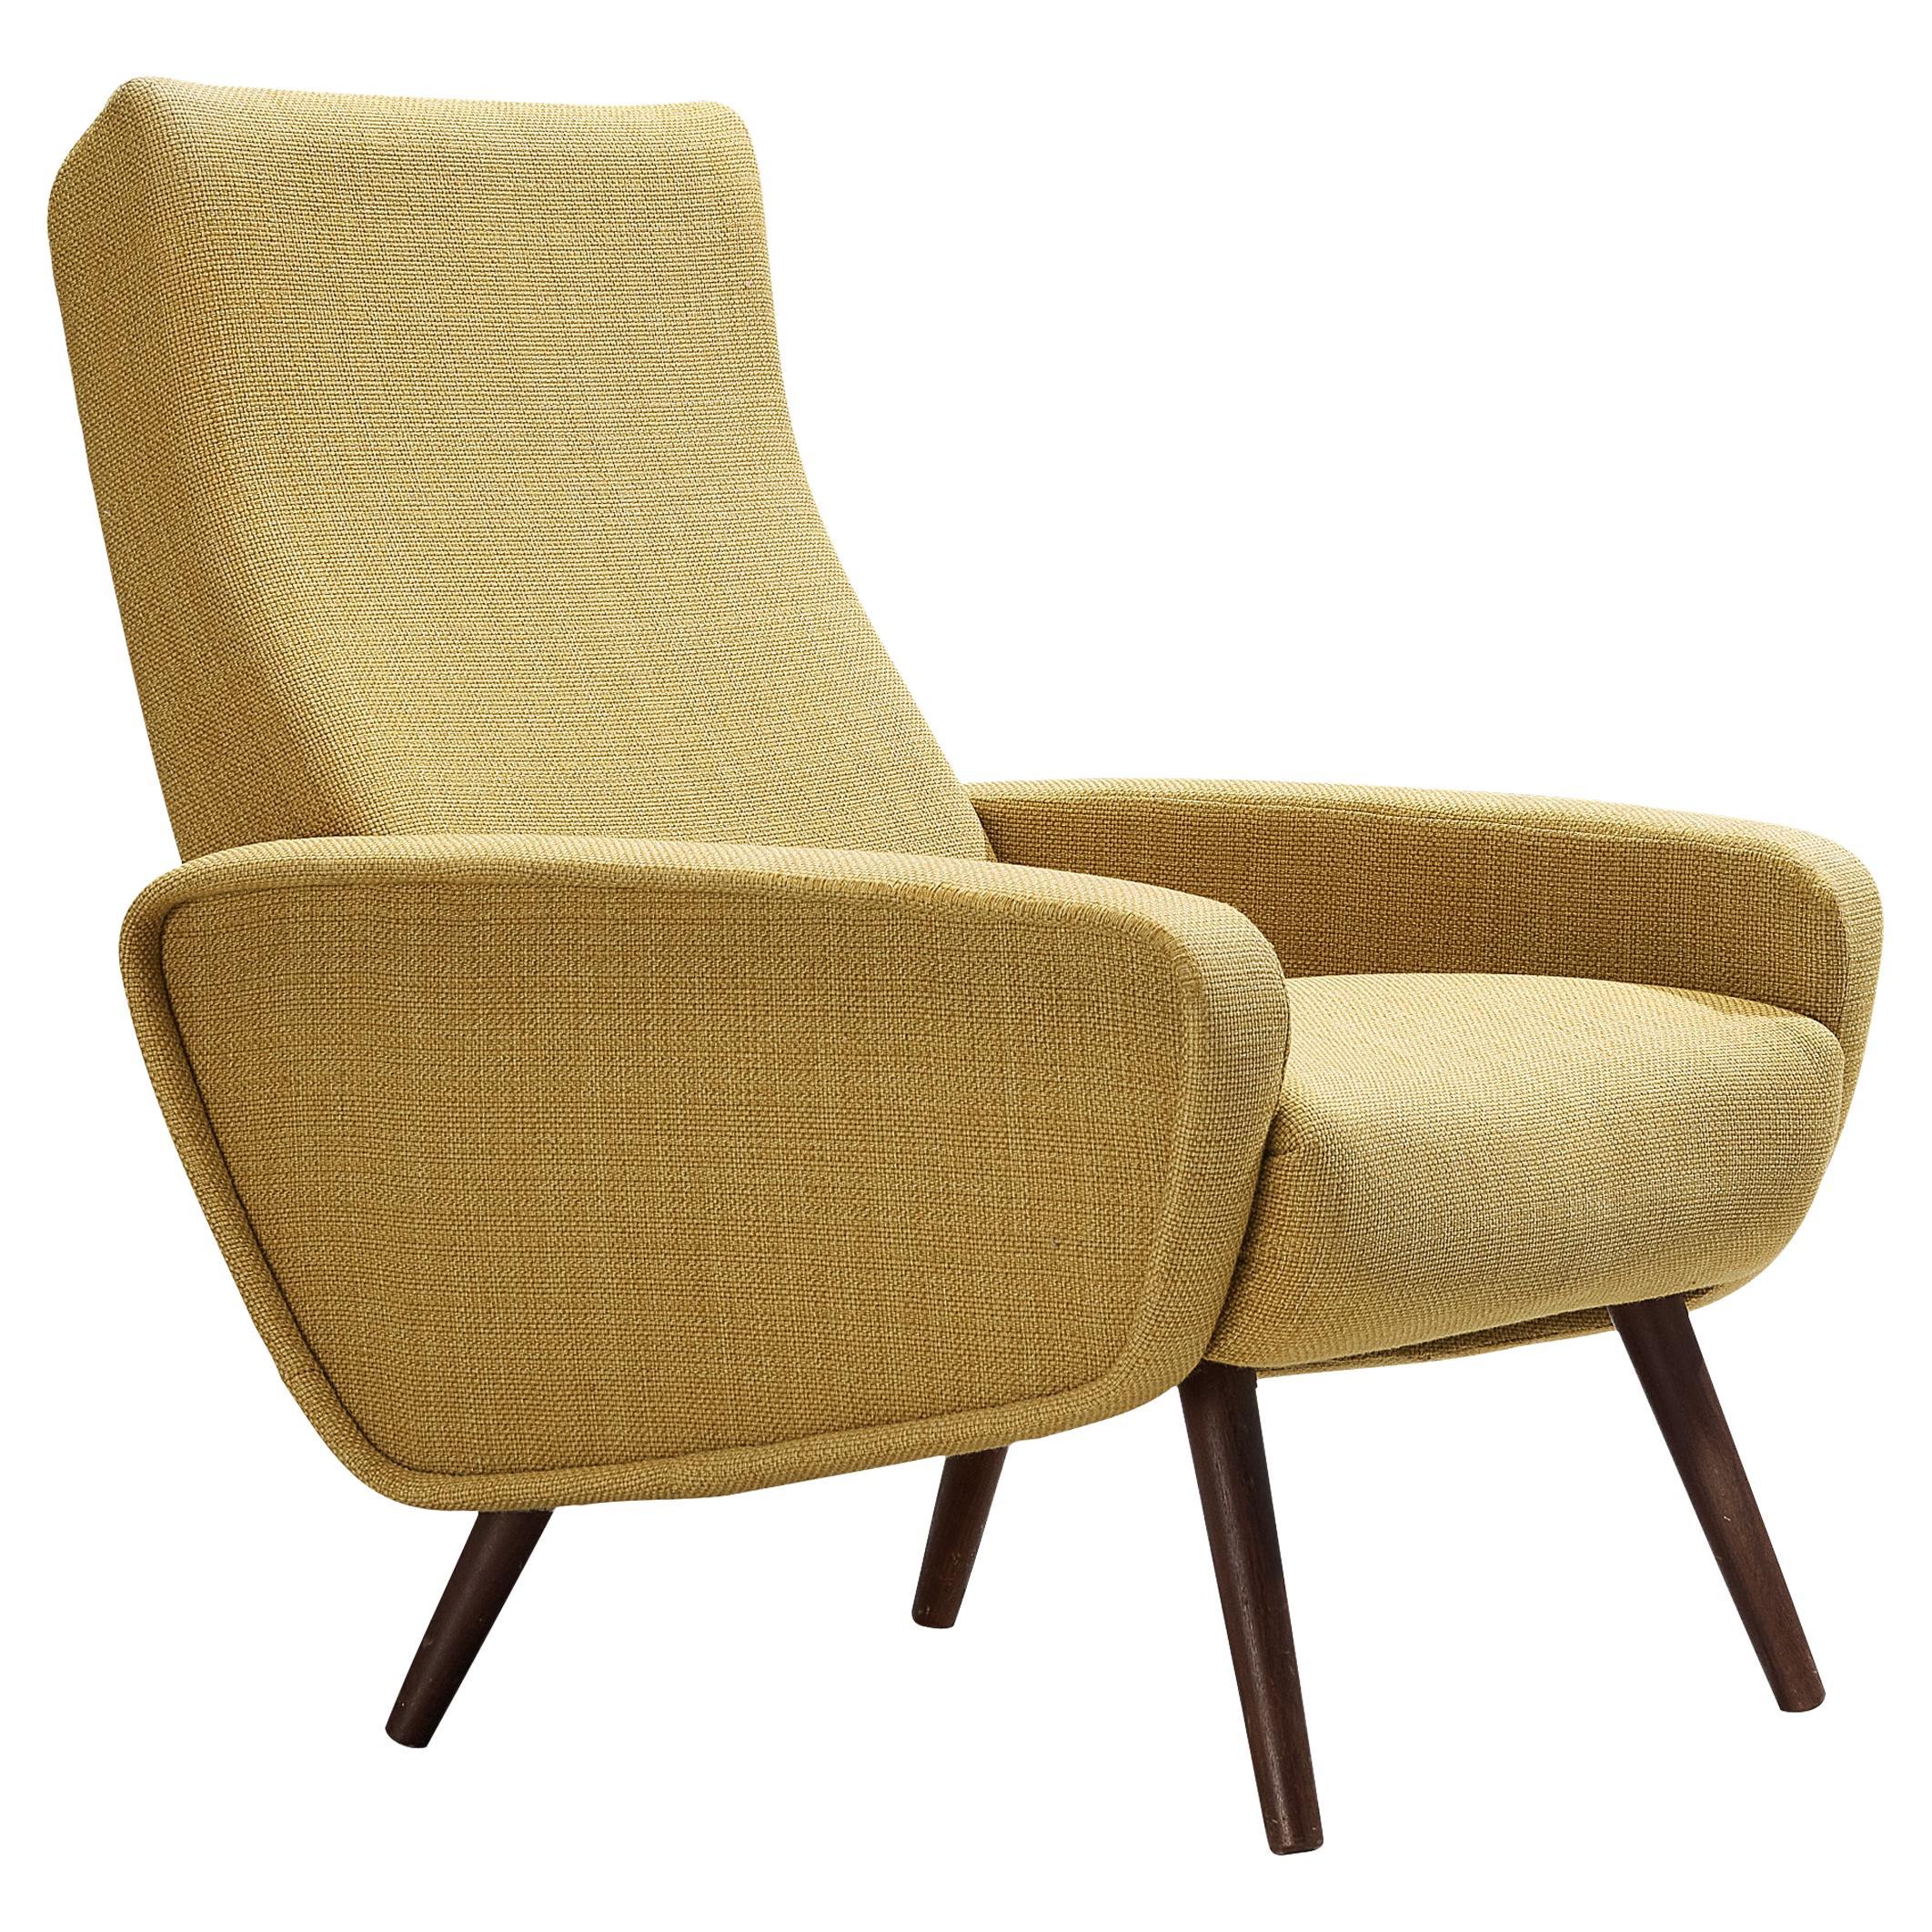 Italian Midcentury Lounge Chair in Mustard Yellow Upholstery For Sale